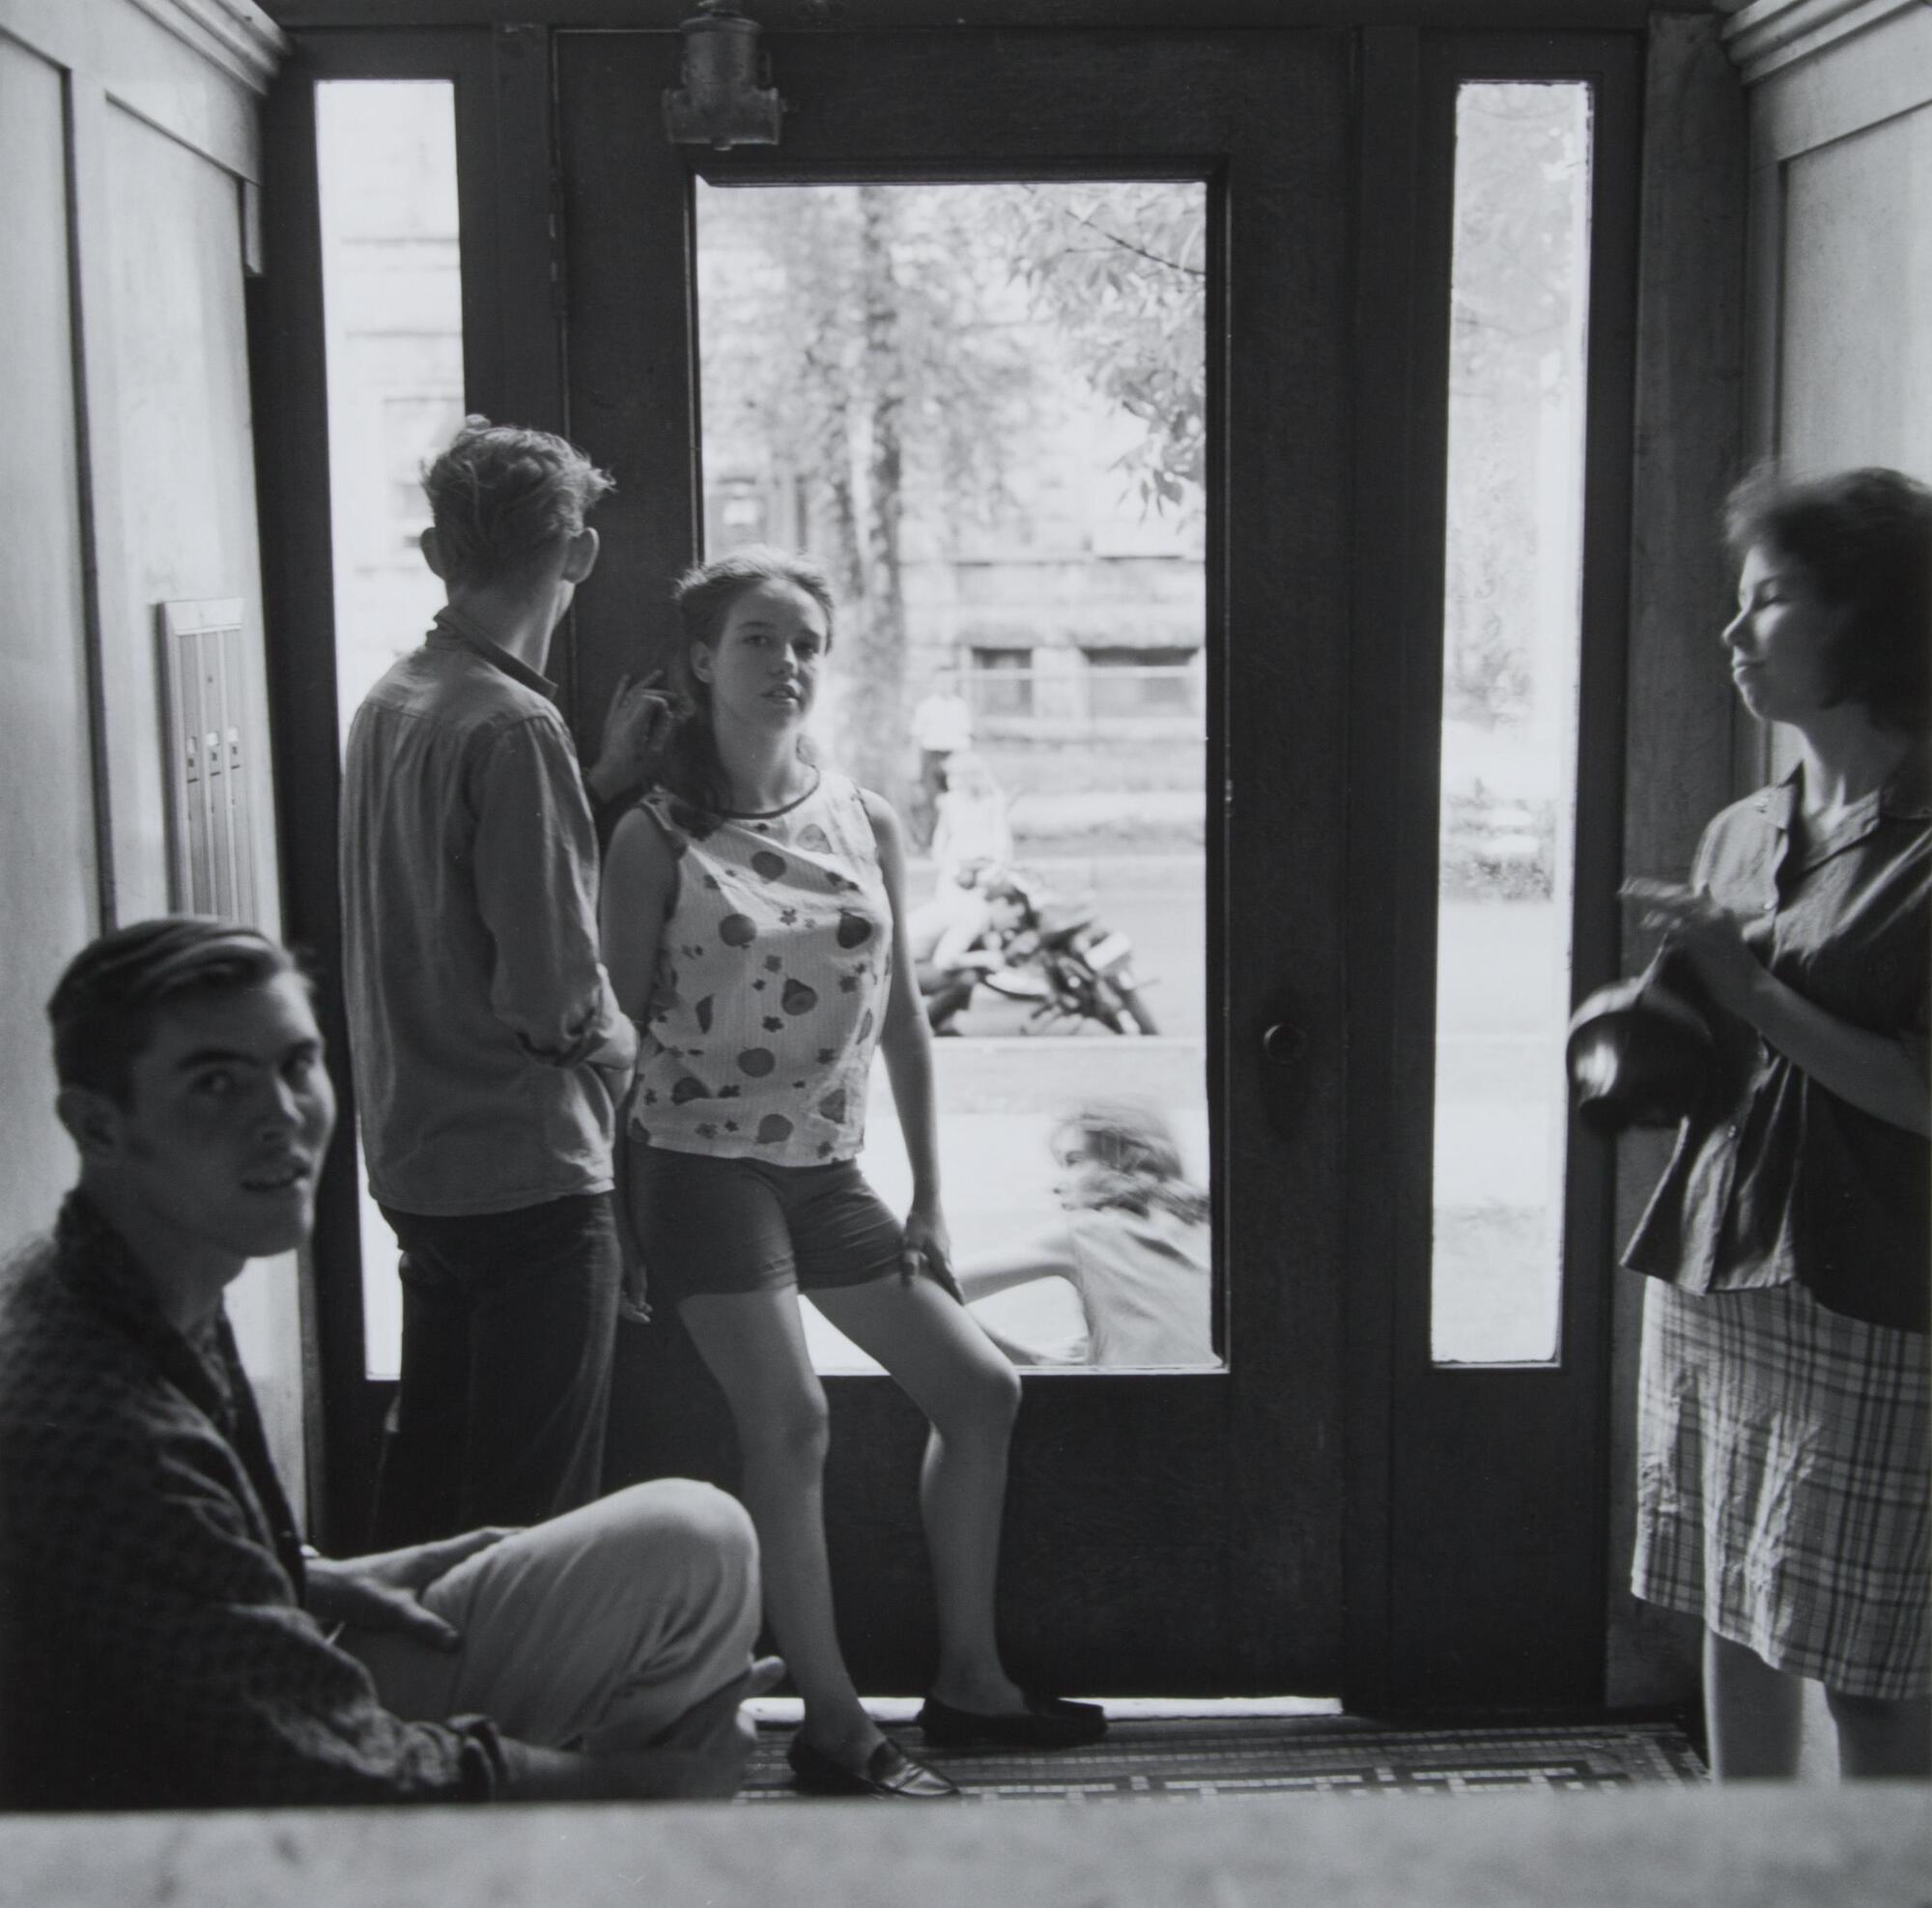 A photograph of two men and two women in an apartment foyer. They stand casually as they interact with one another. Beyond the door, people are visible on the street.